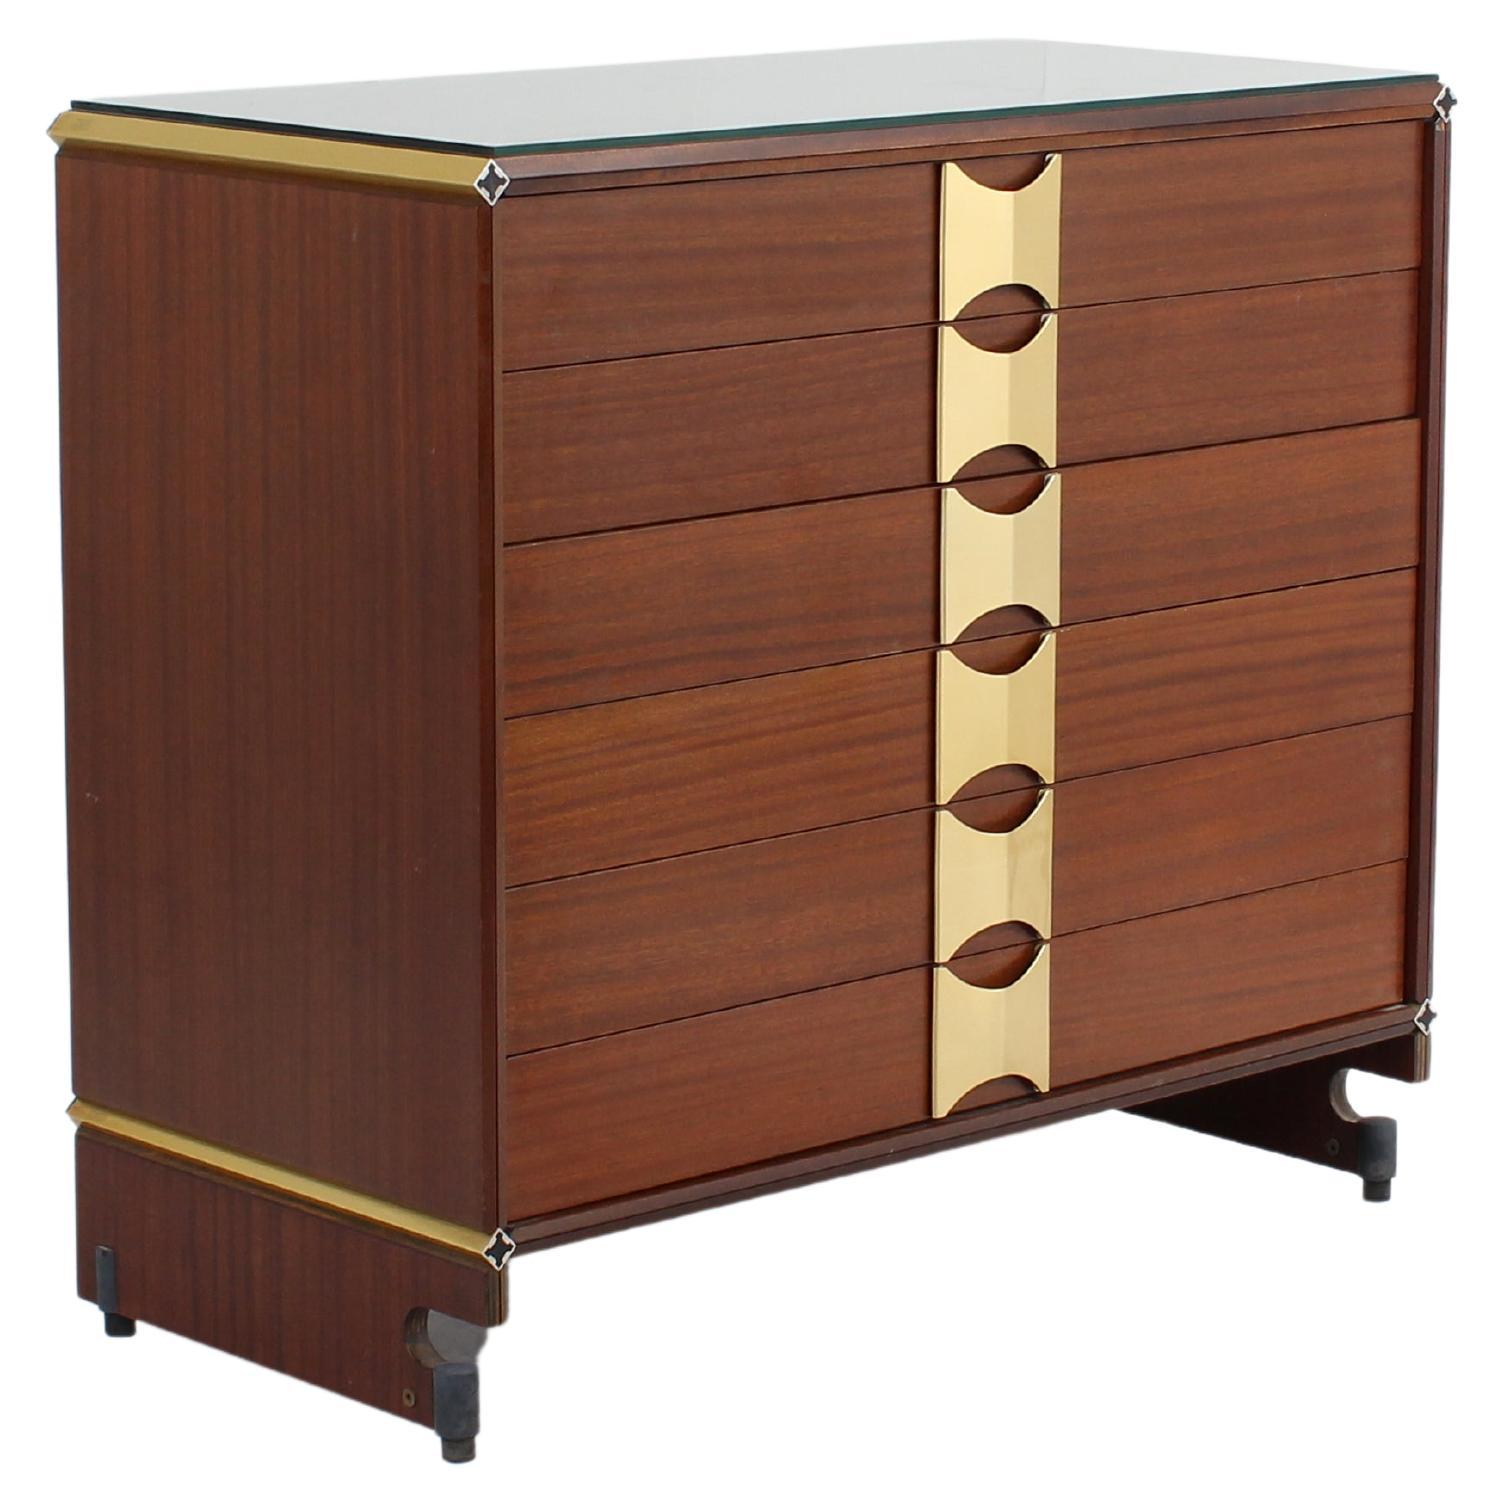 Mid-Century Series "Fitting" by Piarotto Wooden Chest of Drawers Italy 70s